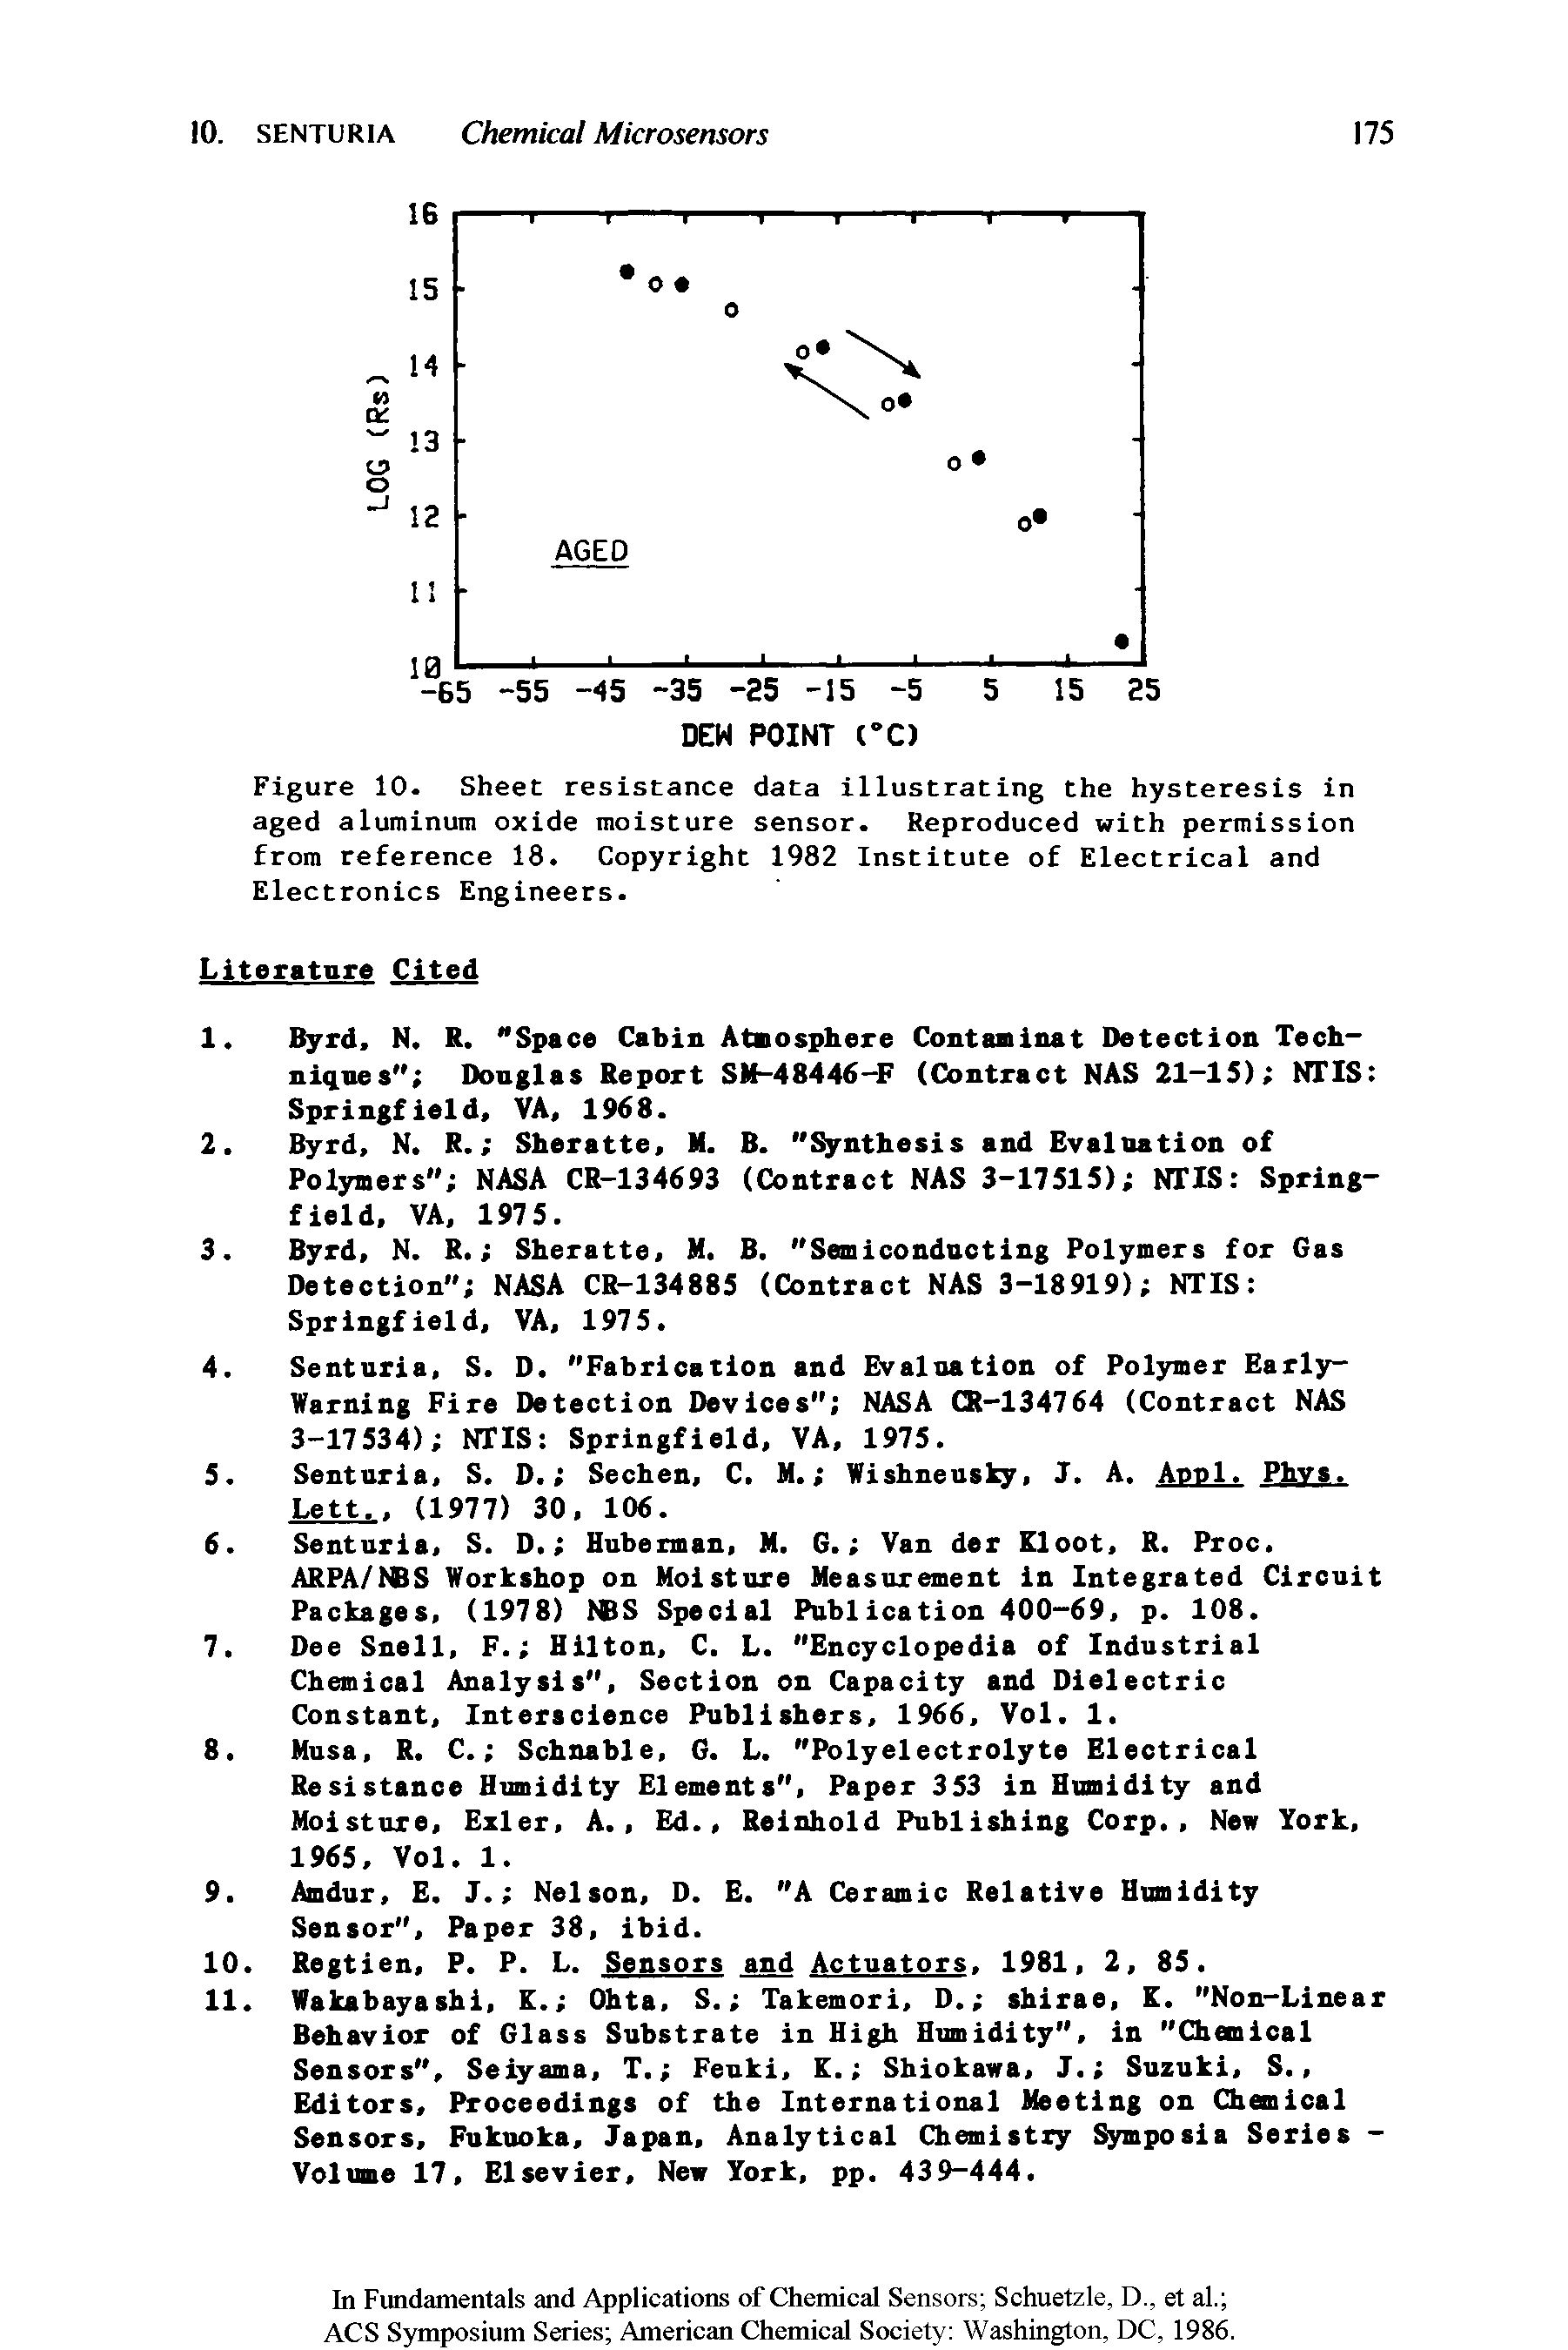 Figure 10- Sheet resistance data illustrating the hysteresis in aged aluminum oxide moisture sensor. Reproduced with permission from reference 18. Copyright 1982 Institute of Electrical and Electronics Engineers.